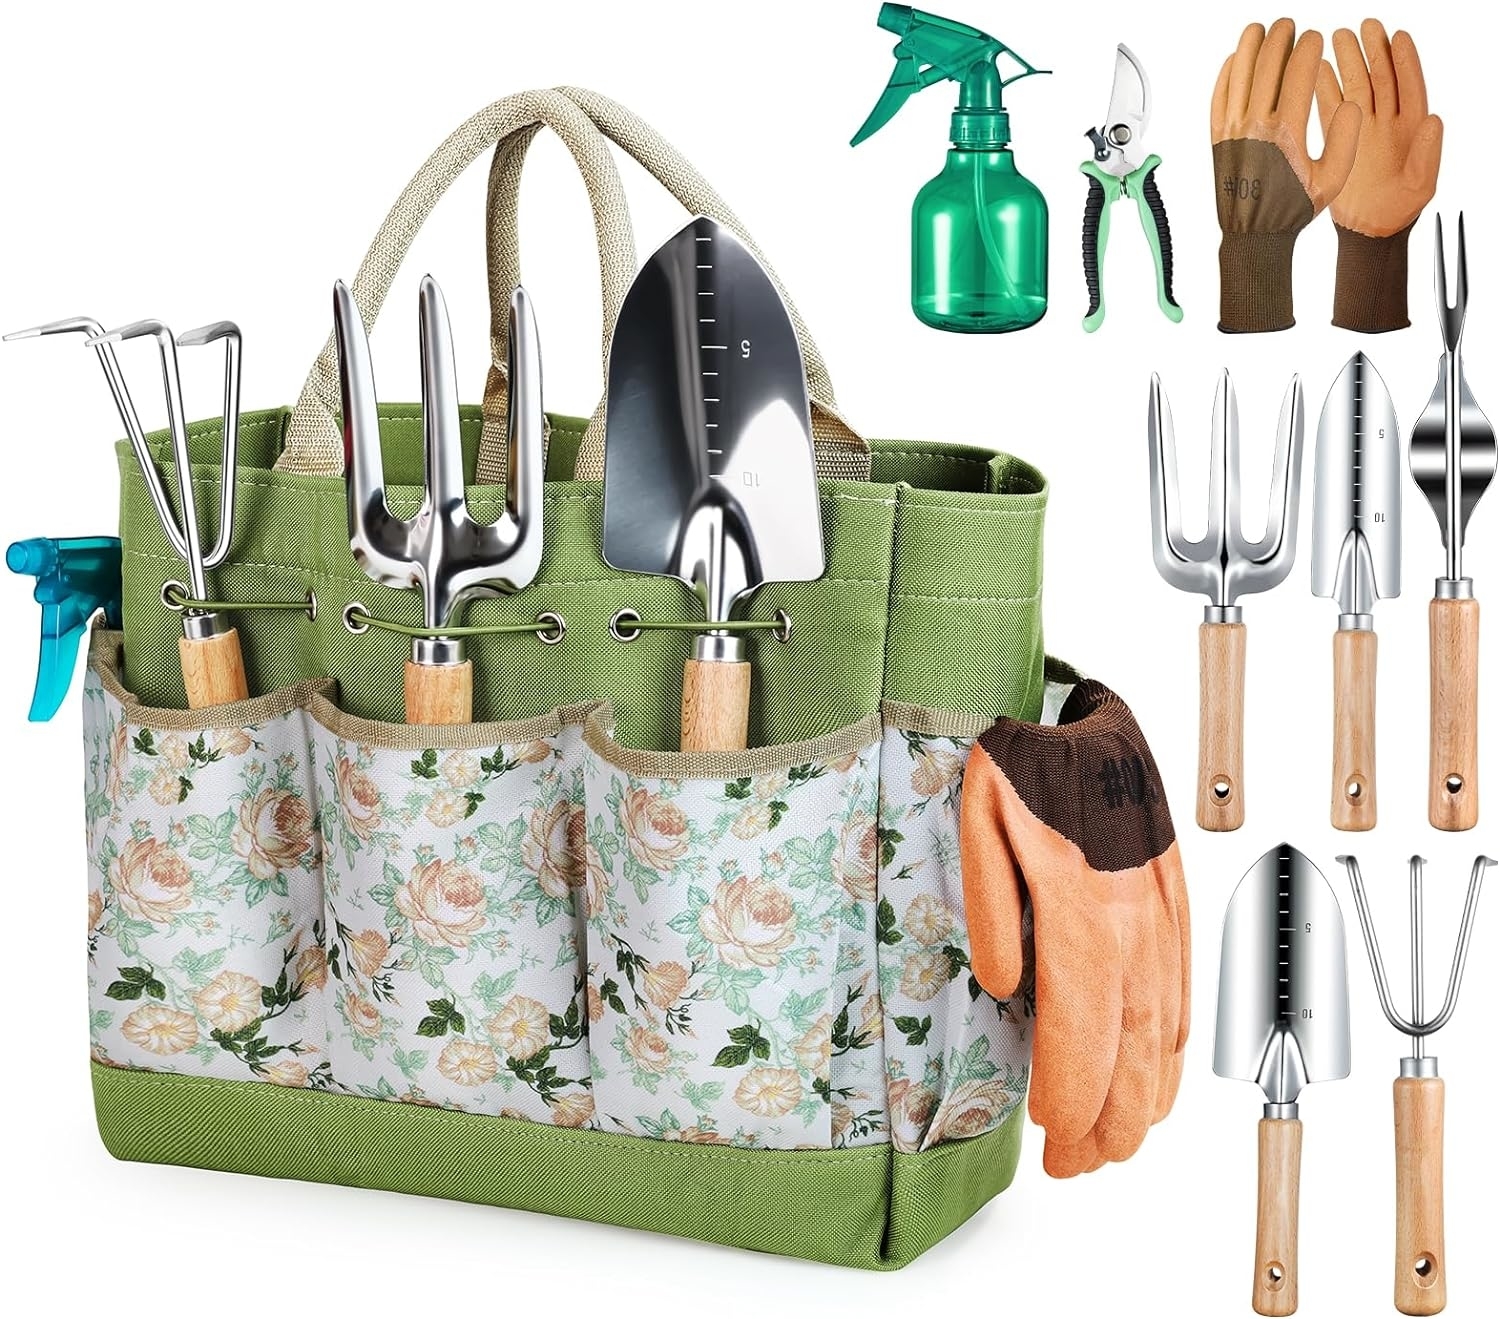 Gardening tool set with floral tote, gloves, spray bottle, and various tools. Perfect for garden enthusiasts